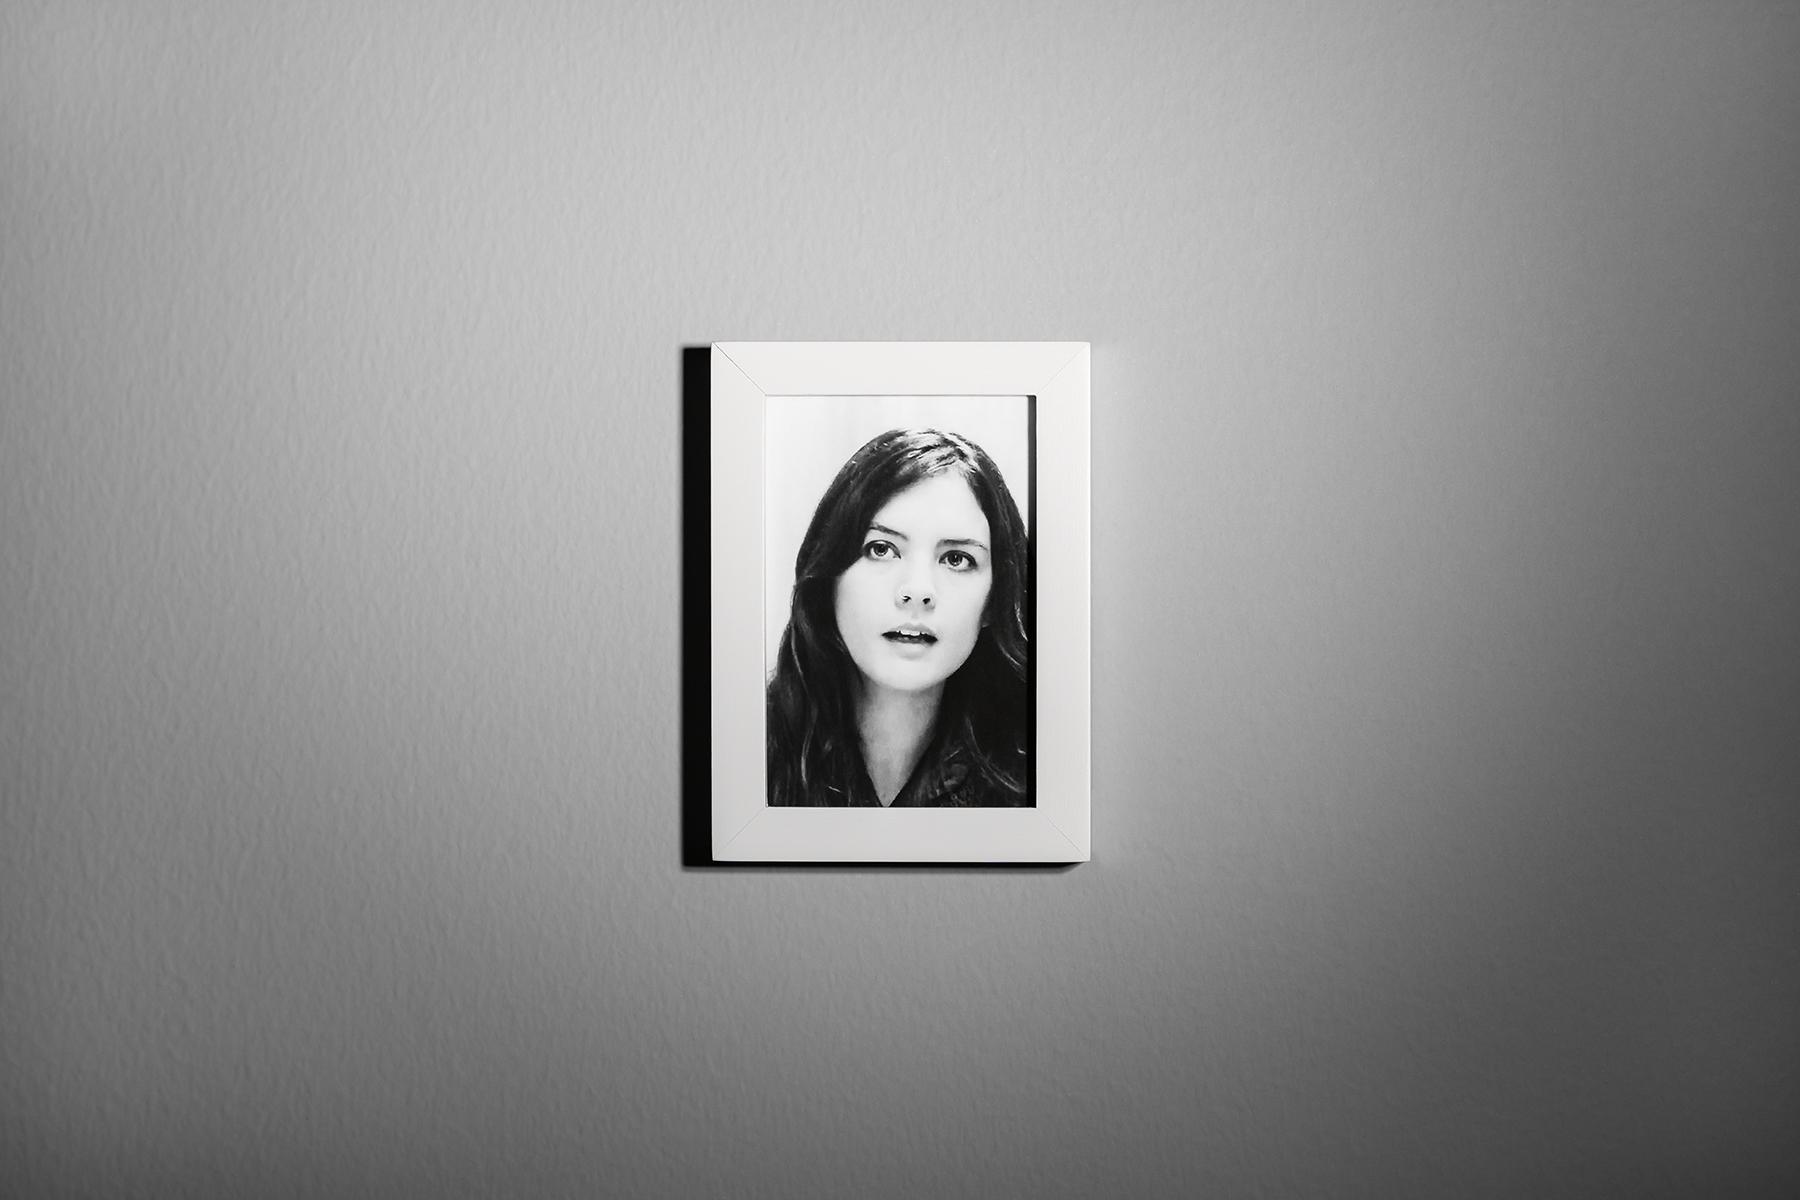 A framed portrait of a woman hangs on a wall